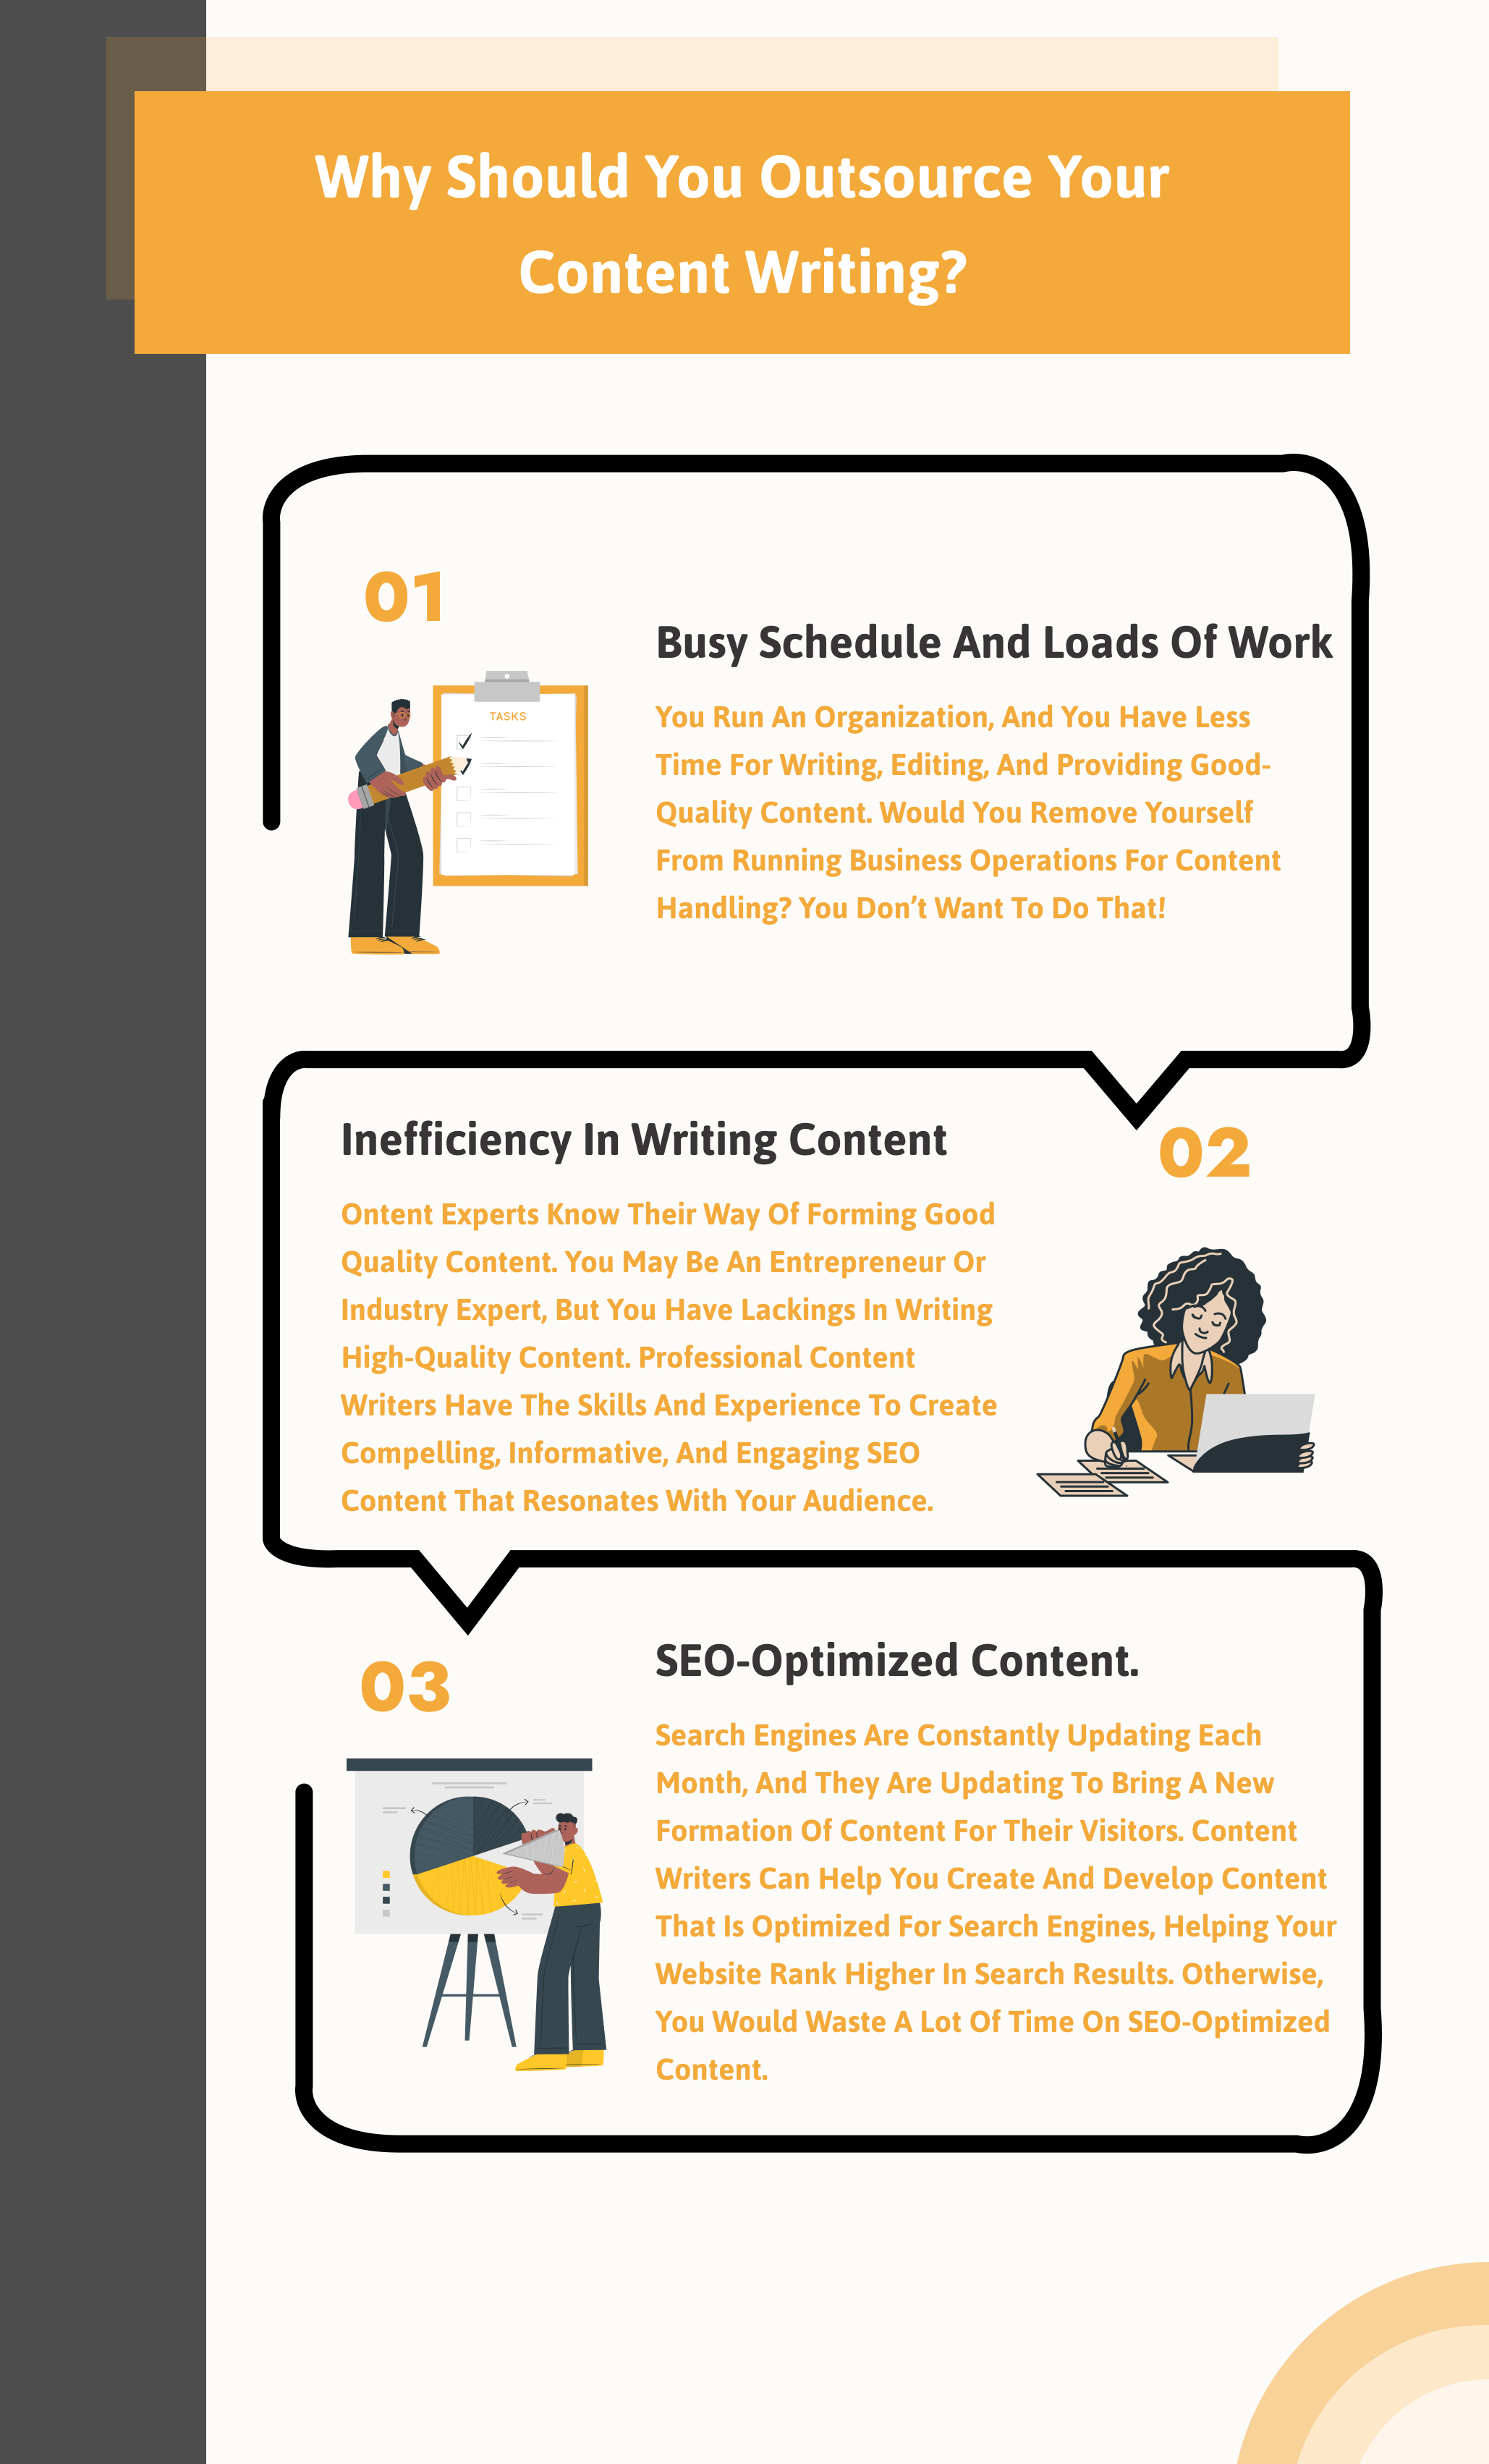 Why should you outsource your content writing - Infographic